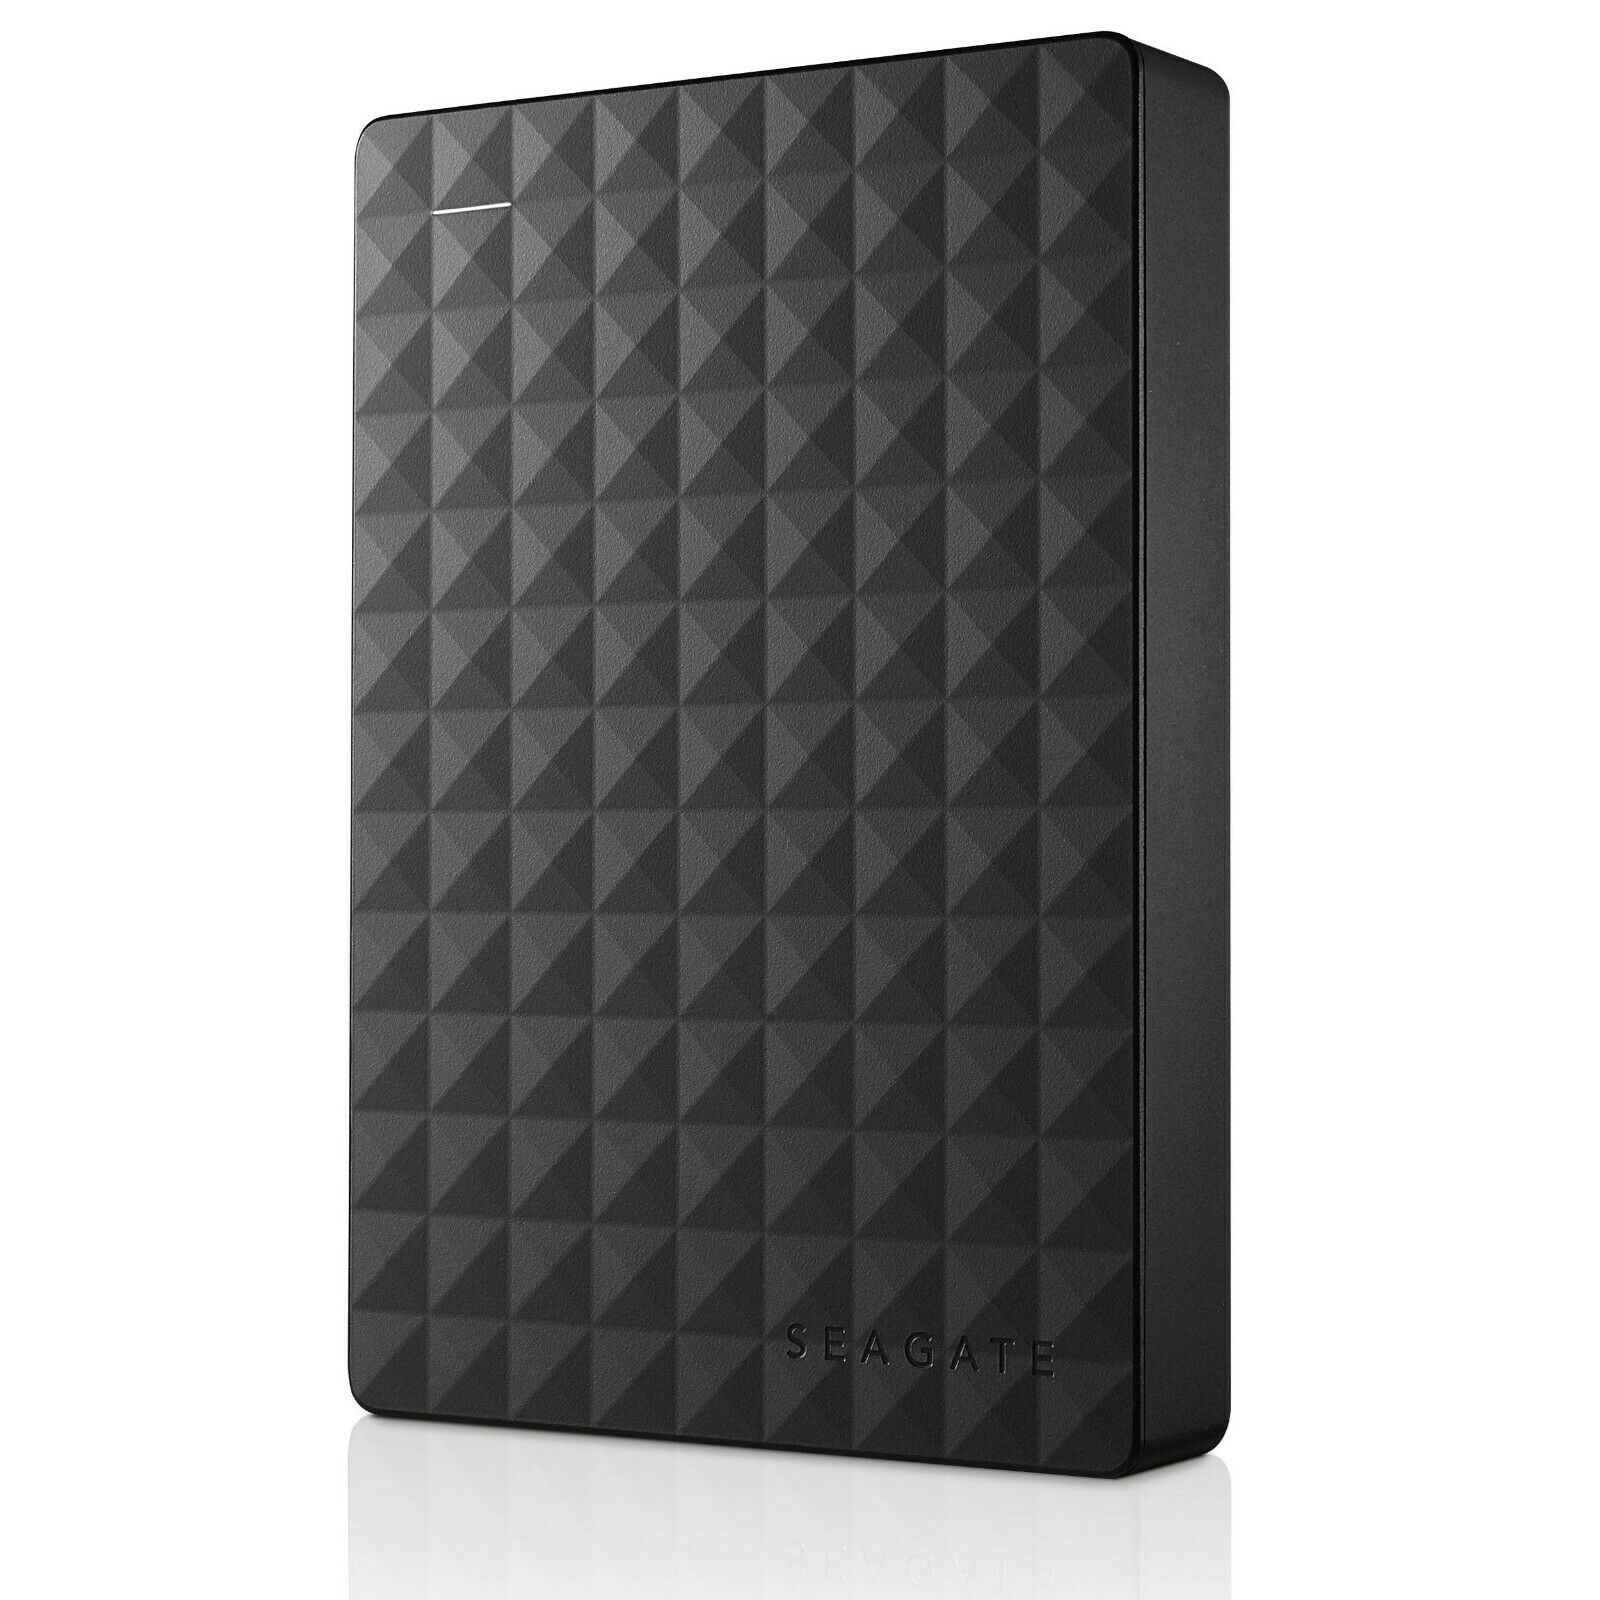 Seagate Expansion 3TB USB 3.0 Portable External Hard Drive for PC, STEA3000400